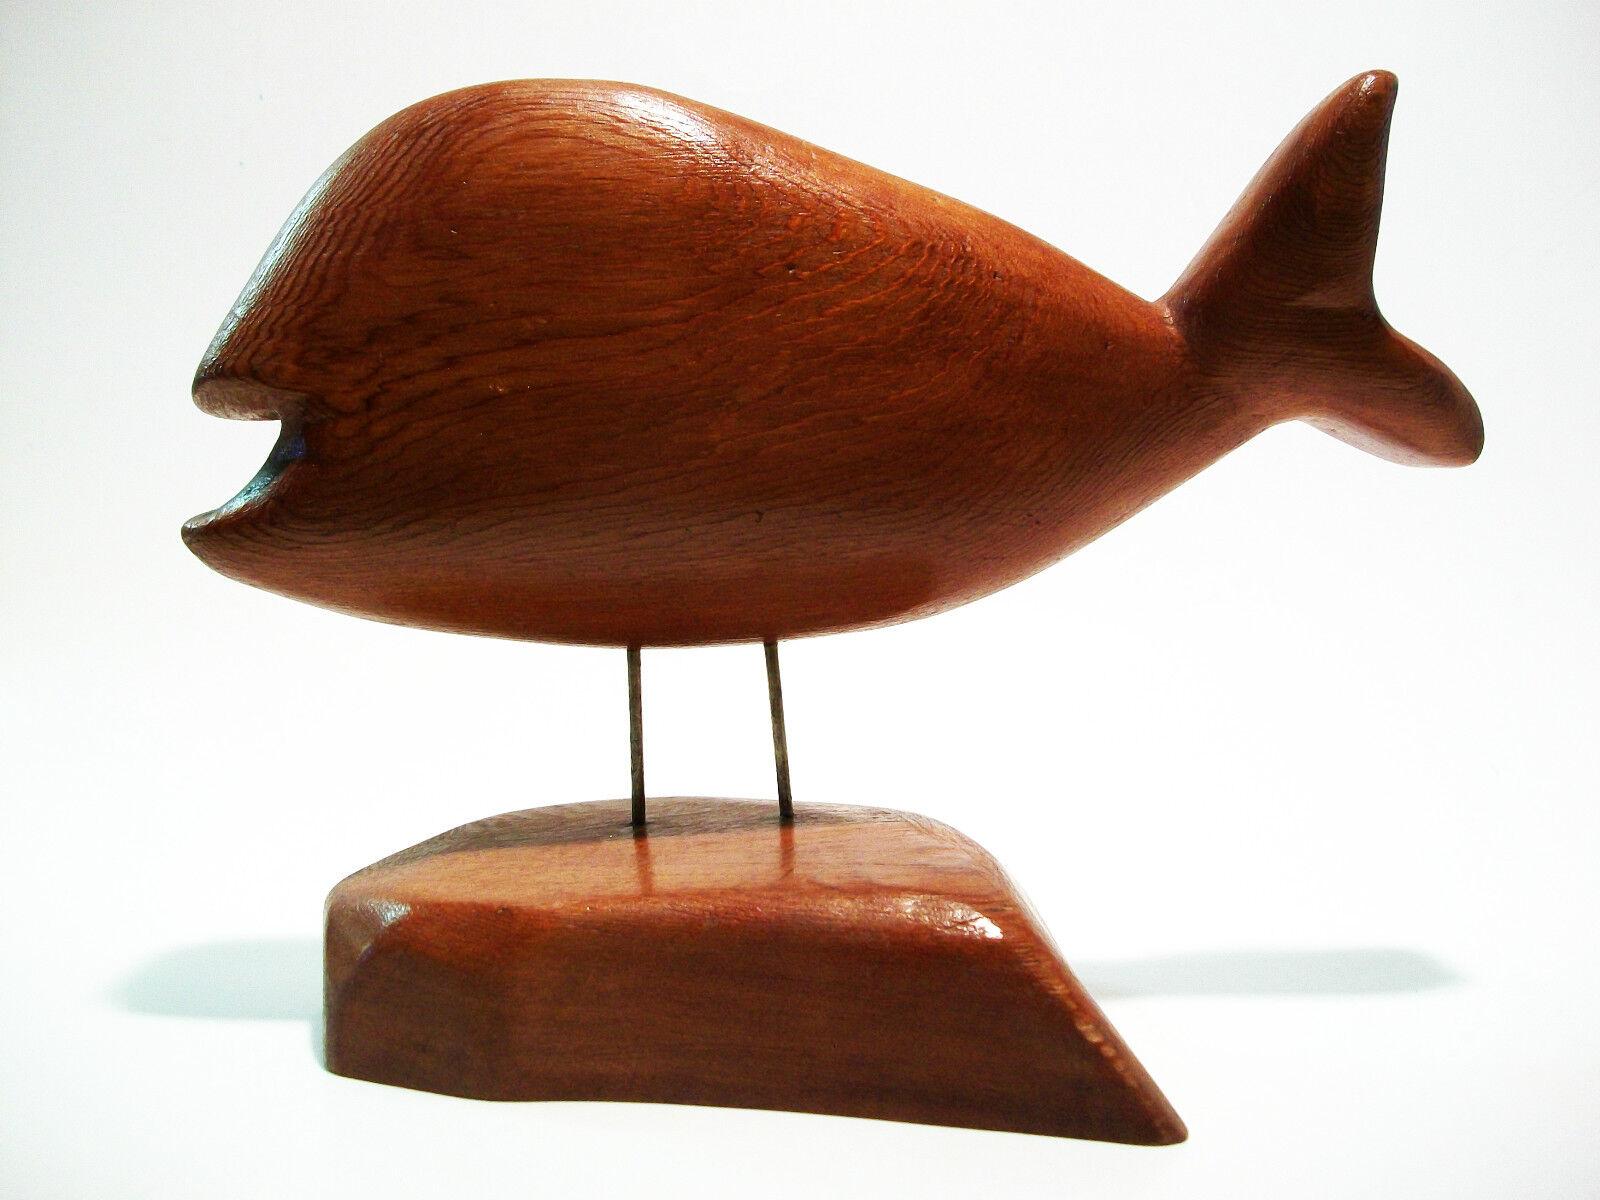 MIKE MATAS - Vintage Folk Art Whale Carving on Stand - Signed - Canada - C. 1980 (Handgeschnitzt) im Angebot